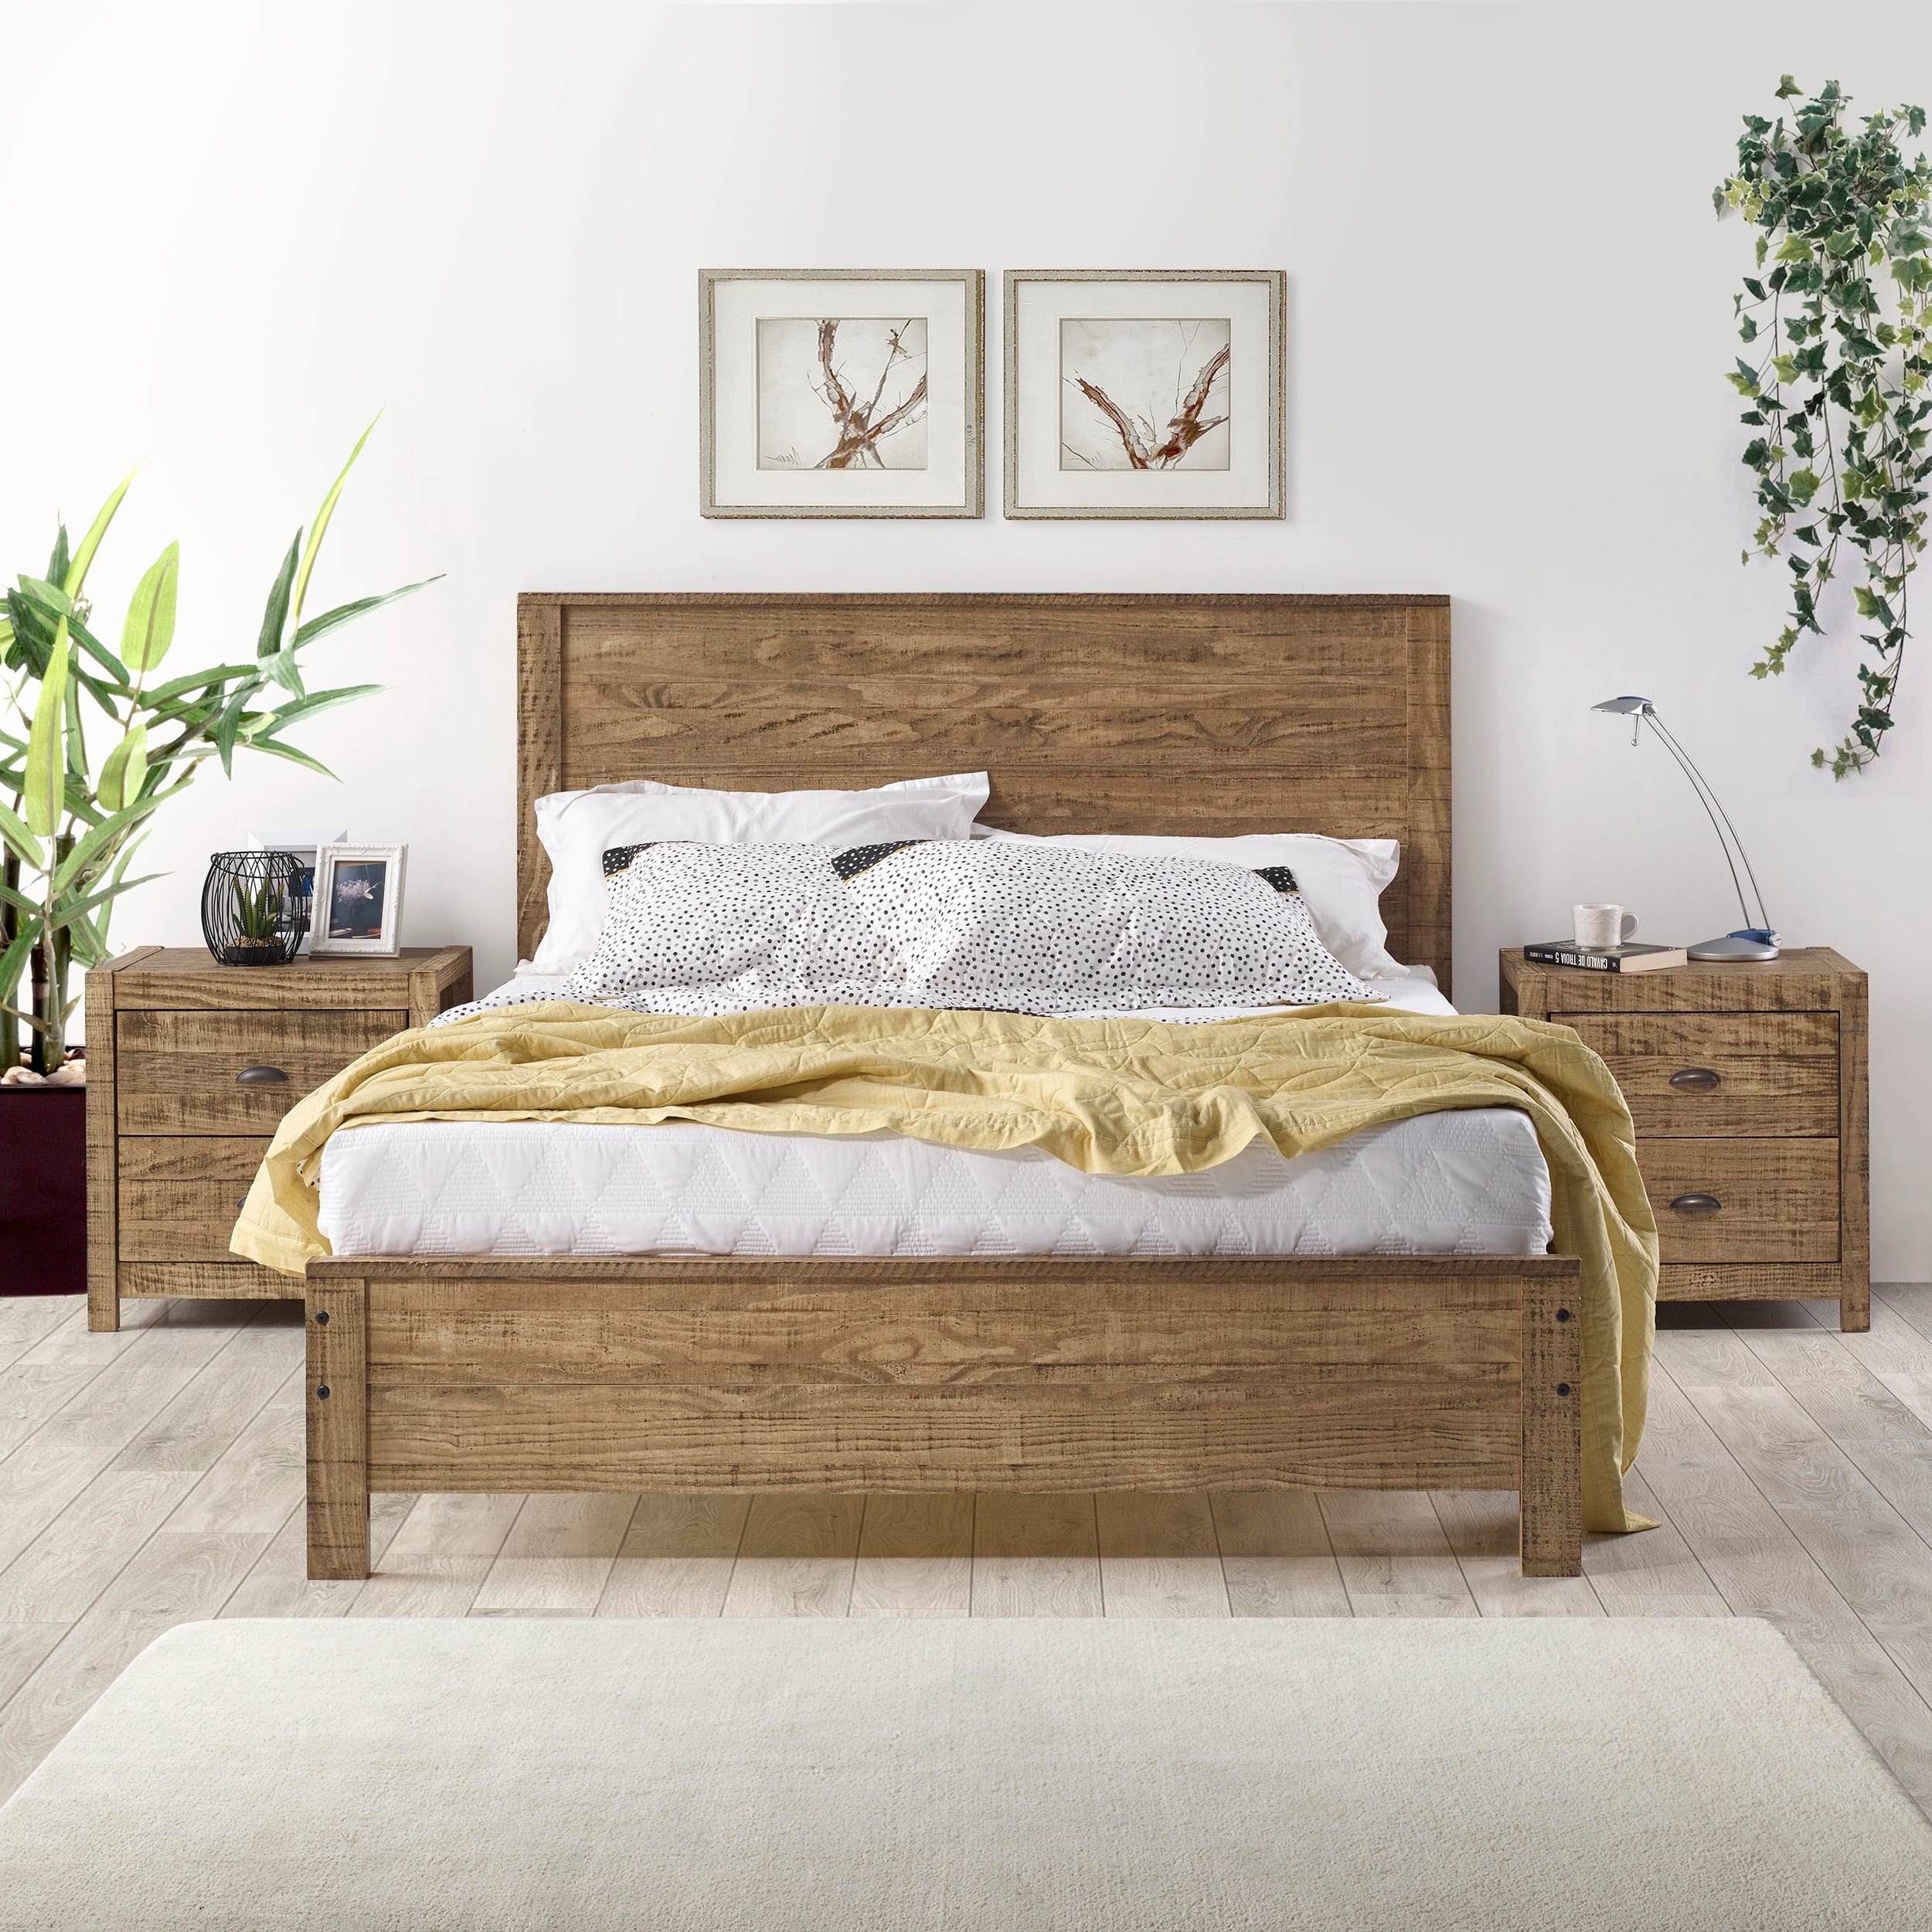 Solid Wood Bed, Modern Rustic Wooden Full Size Bed Frame Box Spring ...